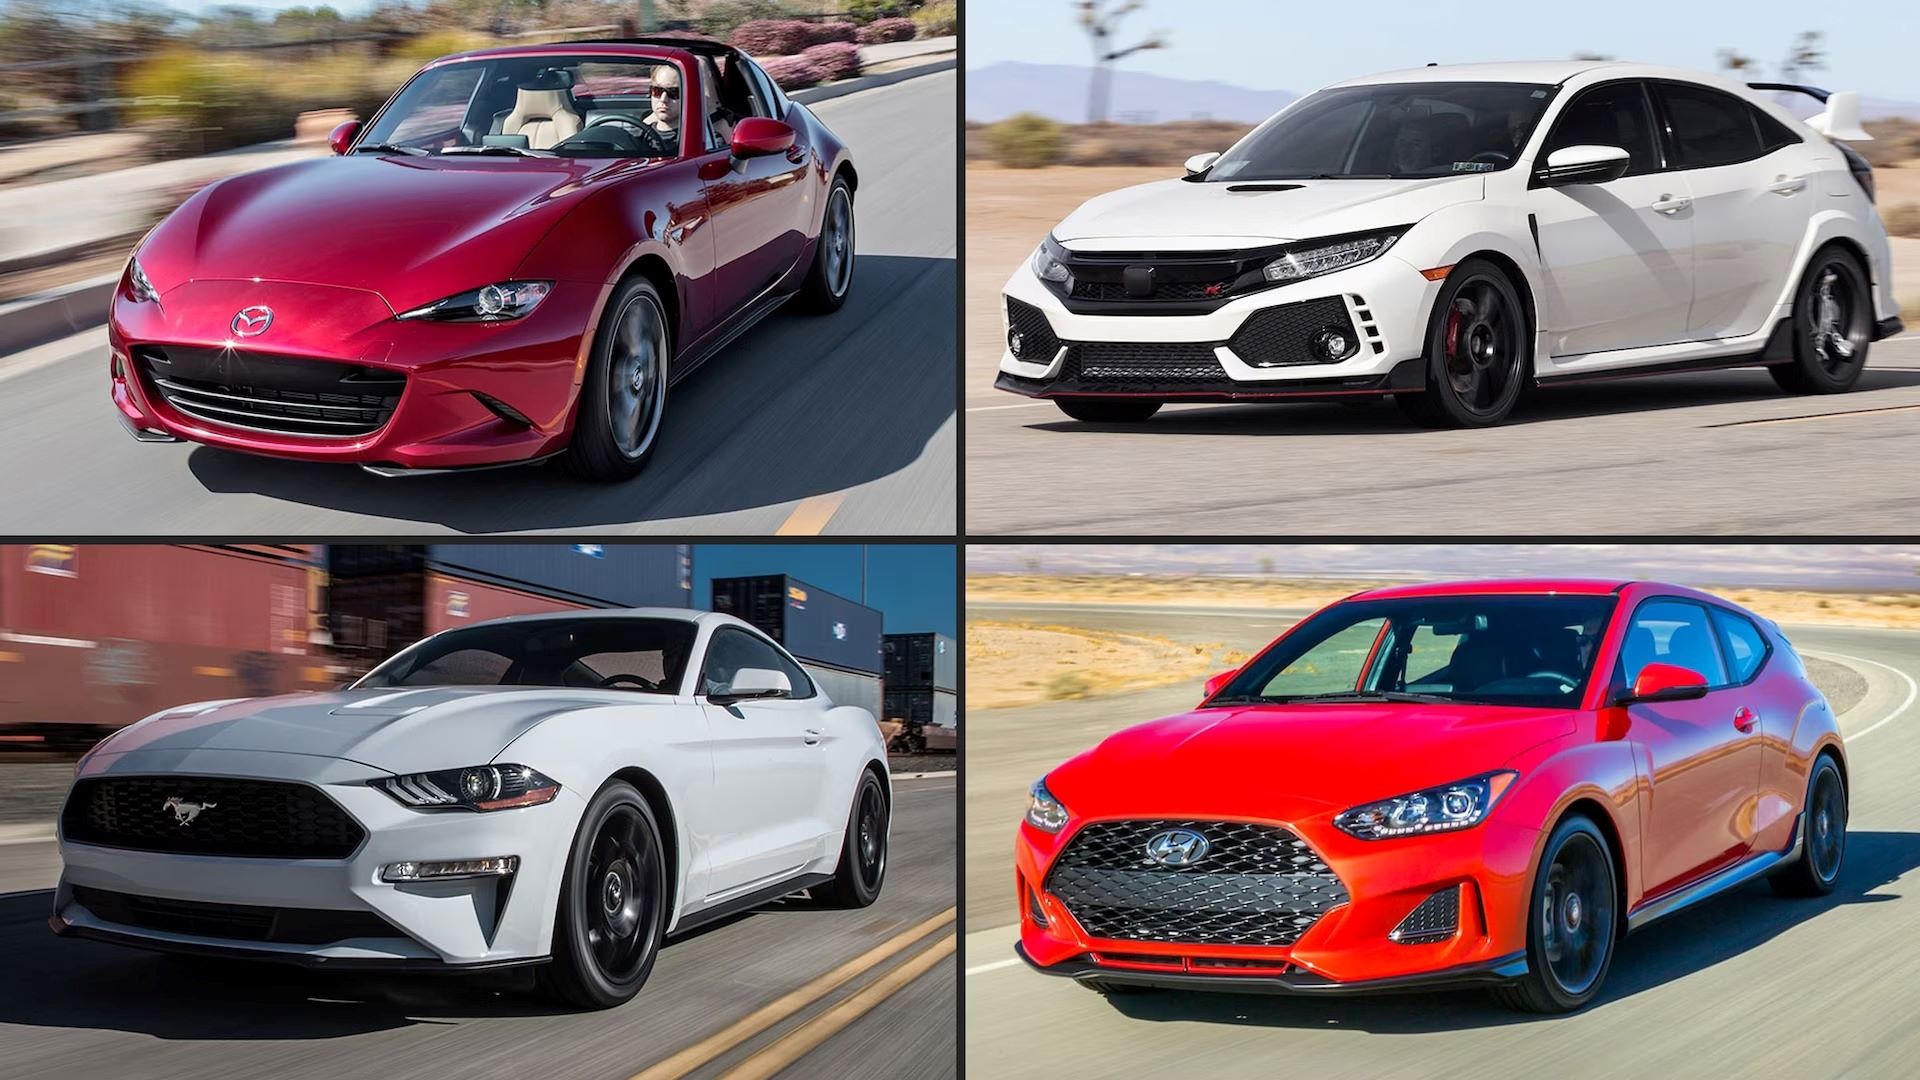 Top 10 Affordable Sports Cars Perfect For Everyday Use By Young Adults